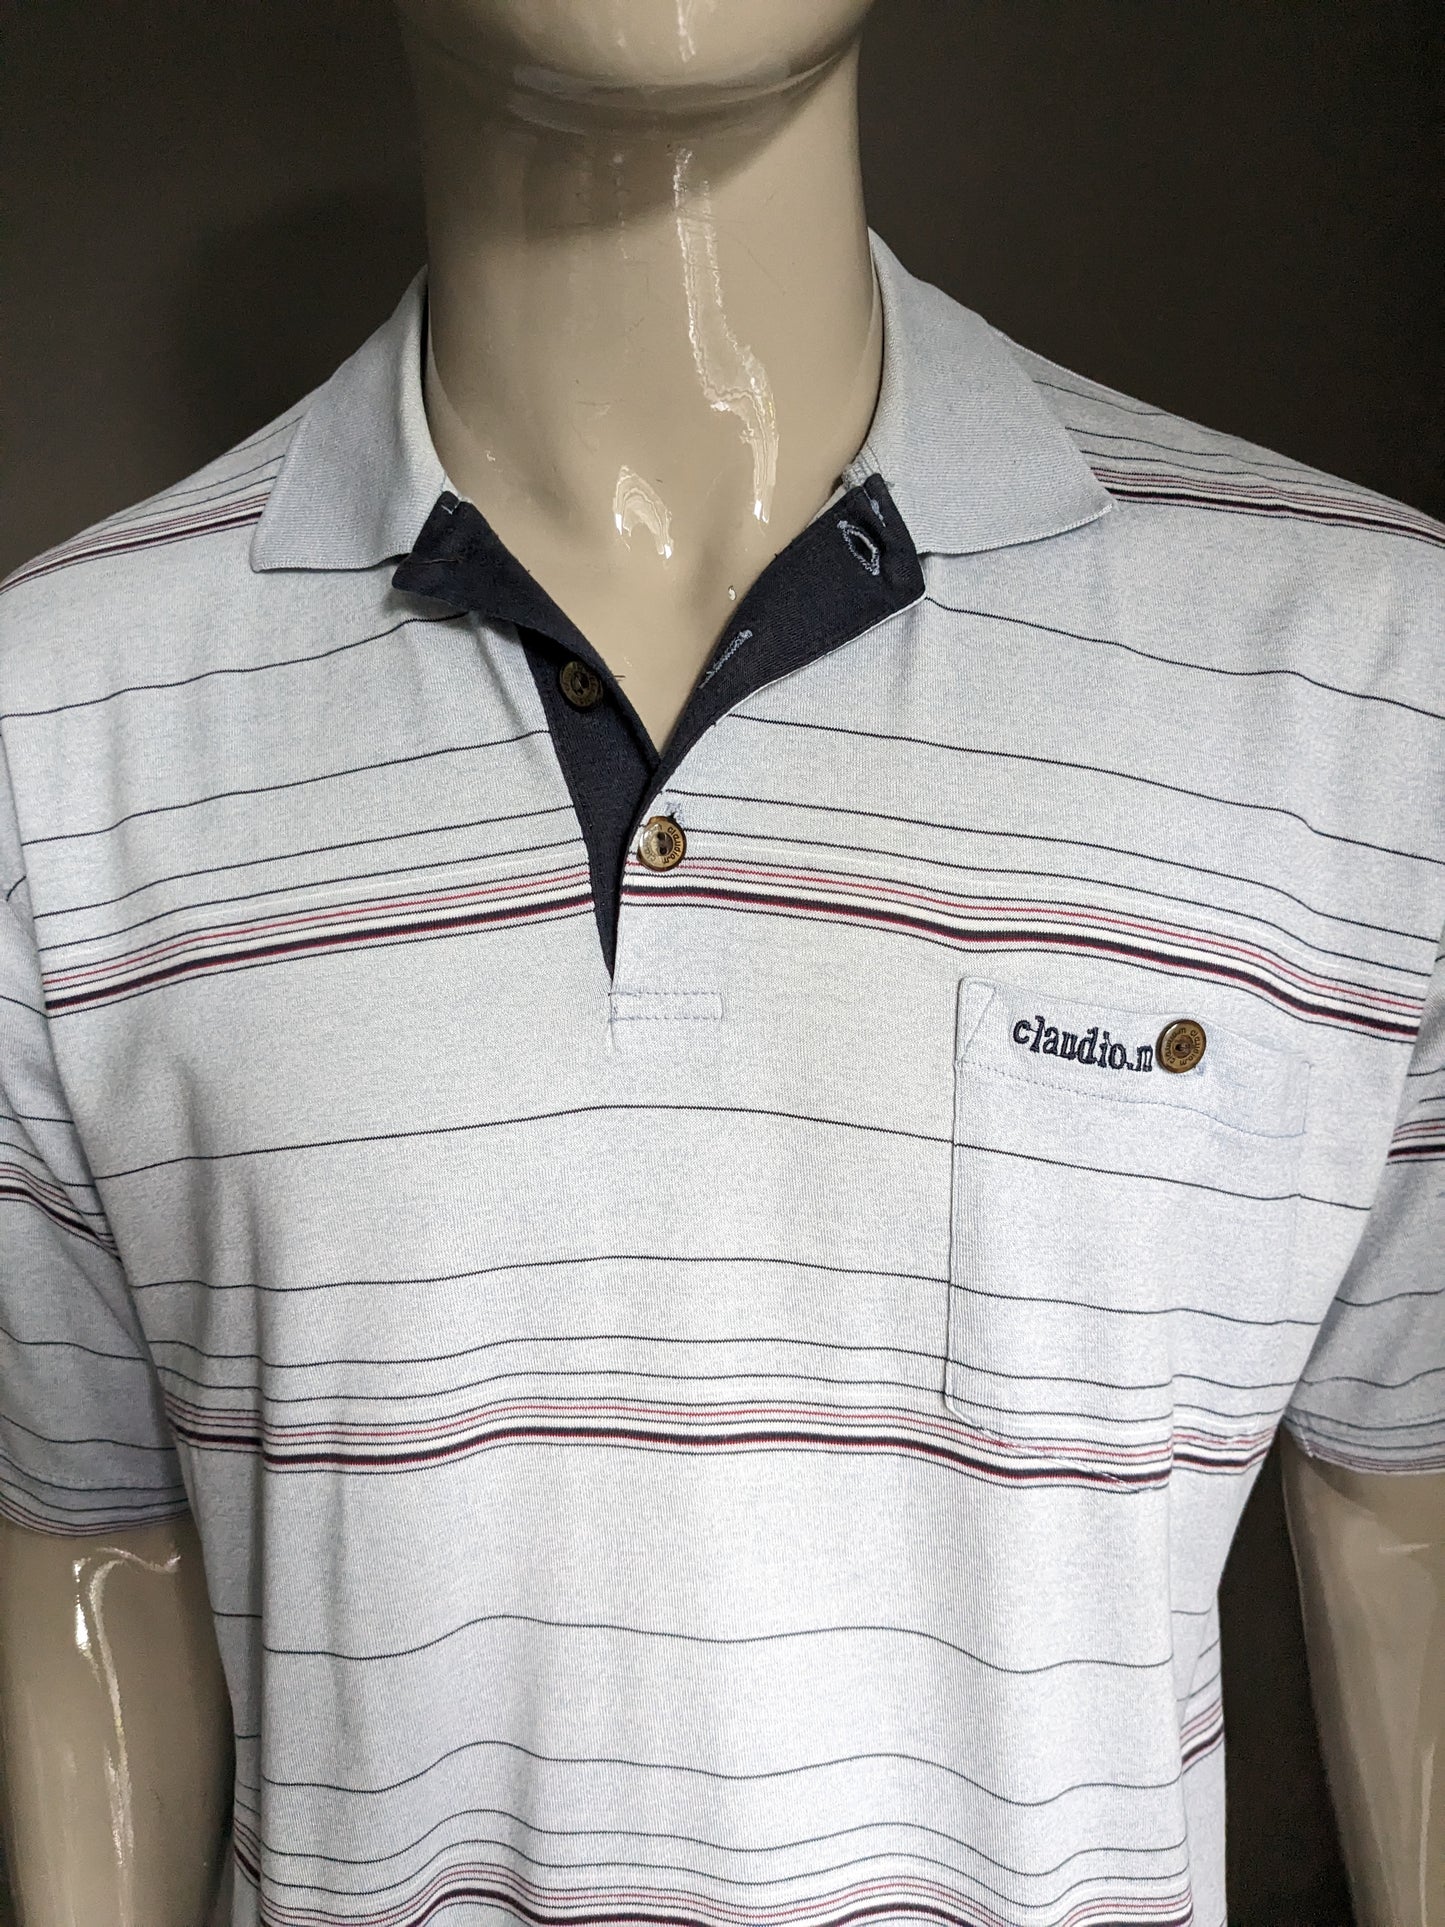 Claudio M Vintage Polo with elastic band. Blue red white striped. Size XL.